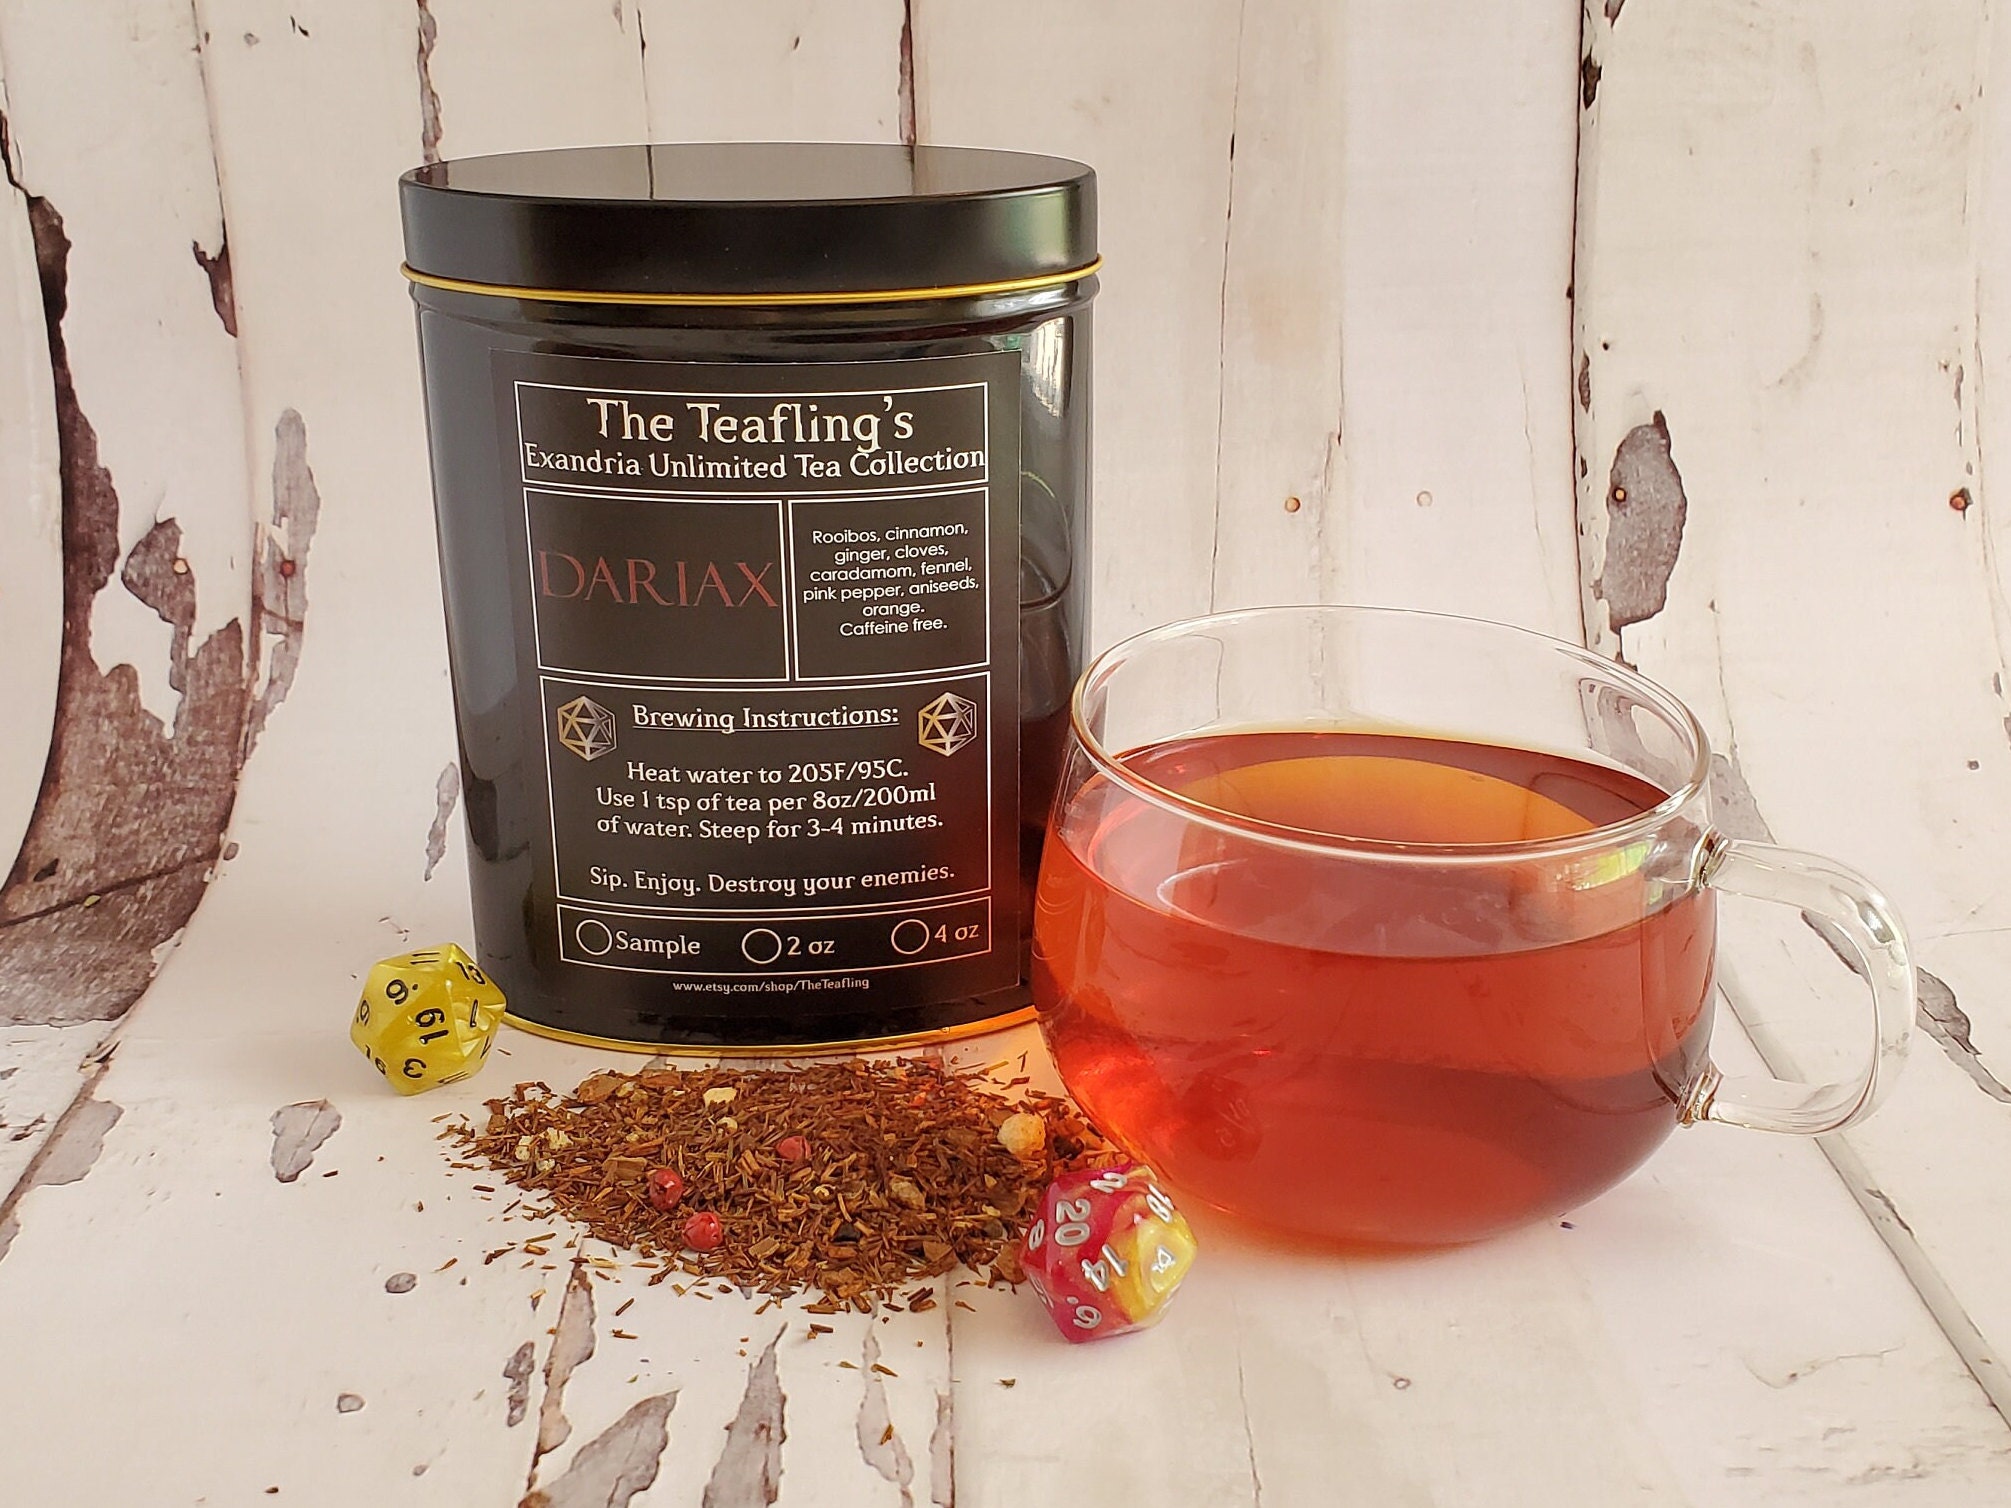 Dariax Inspired Tea Blend - Exandria Unlimited Collection